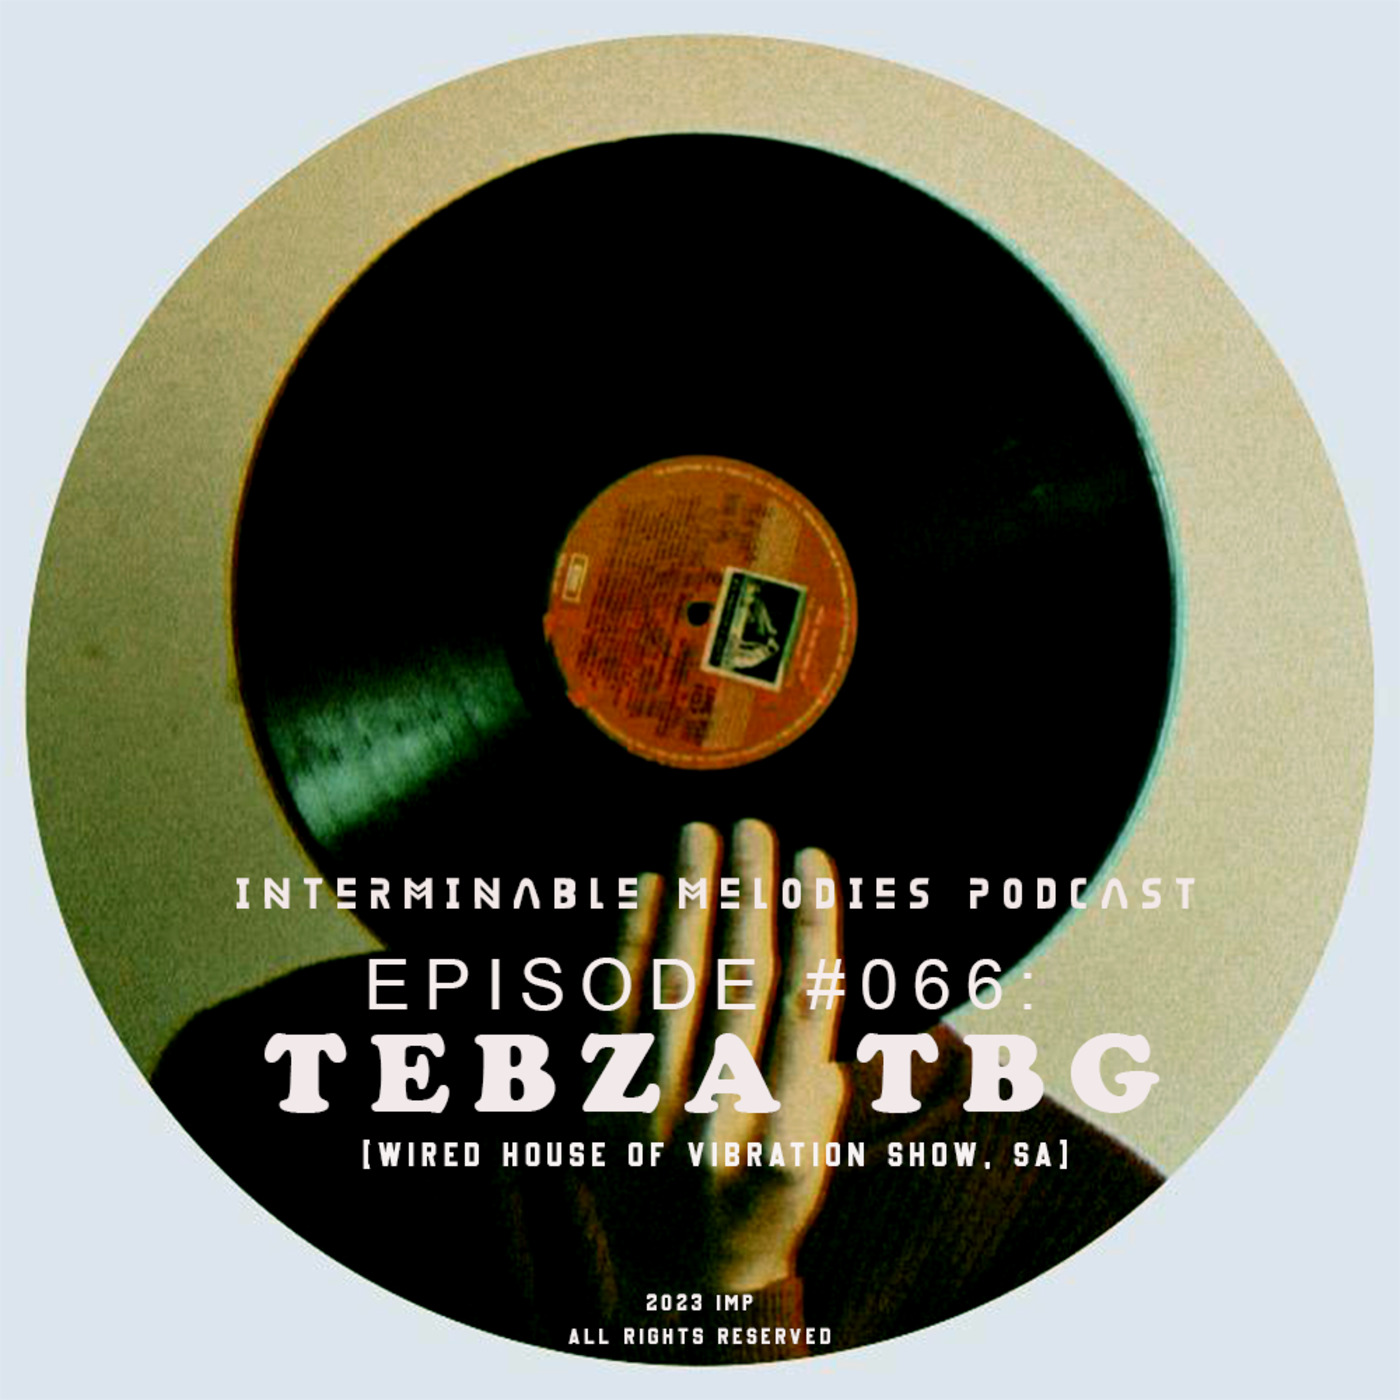 IMP - Episode #066 Guest Mix By Tebza TBG (Wired House Of Vibration Show, SA)